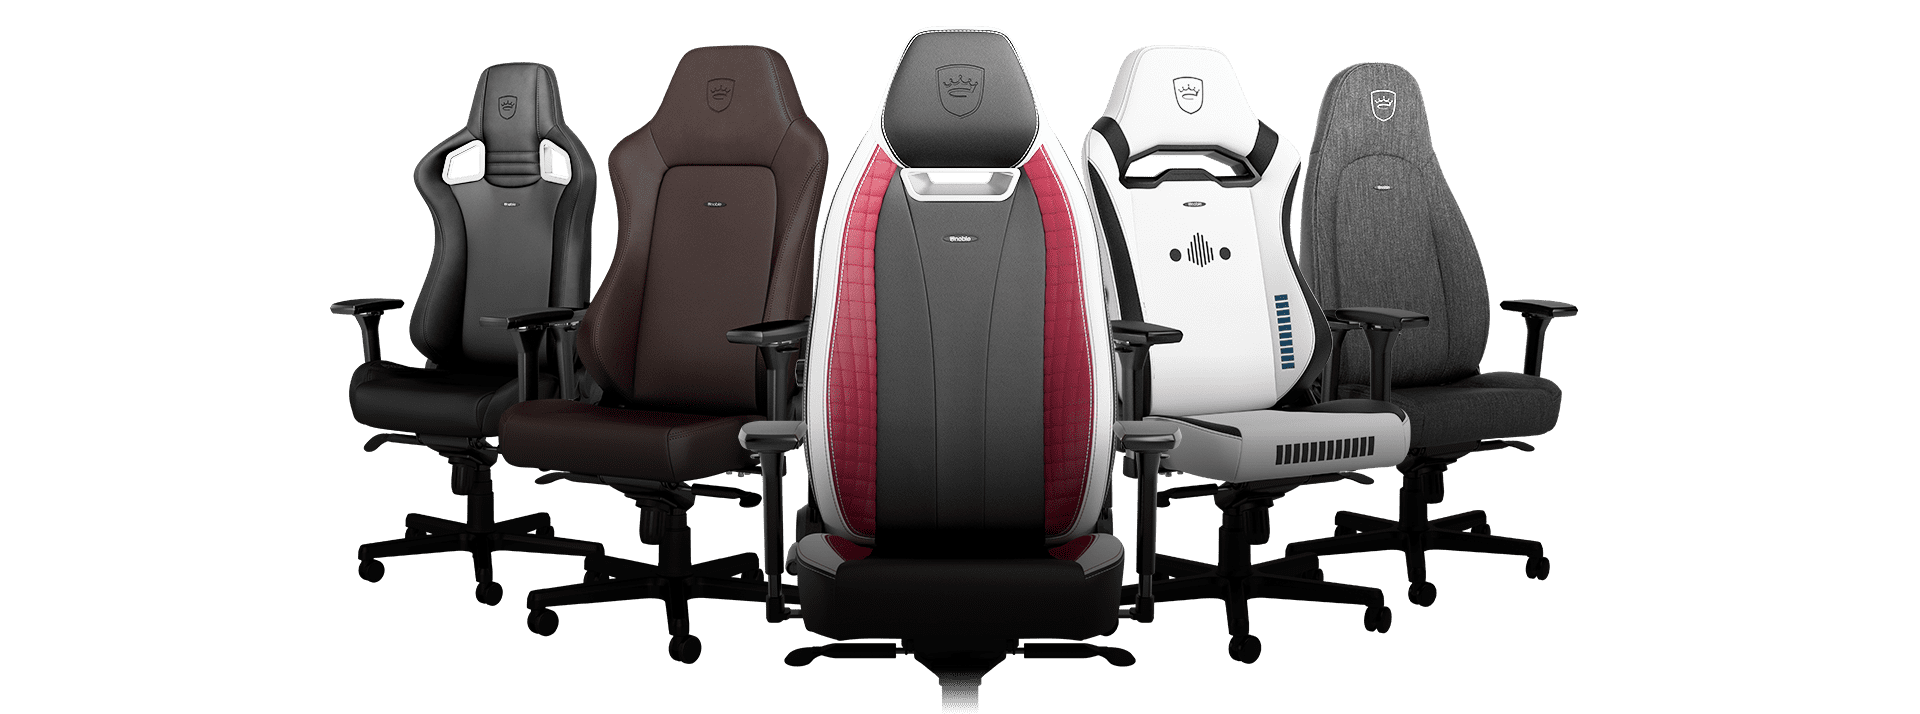 noblechairs gaming chair product portfolio